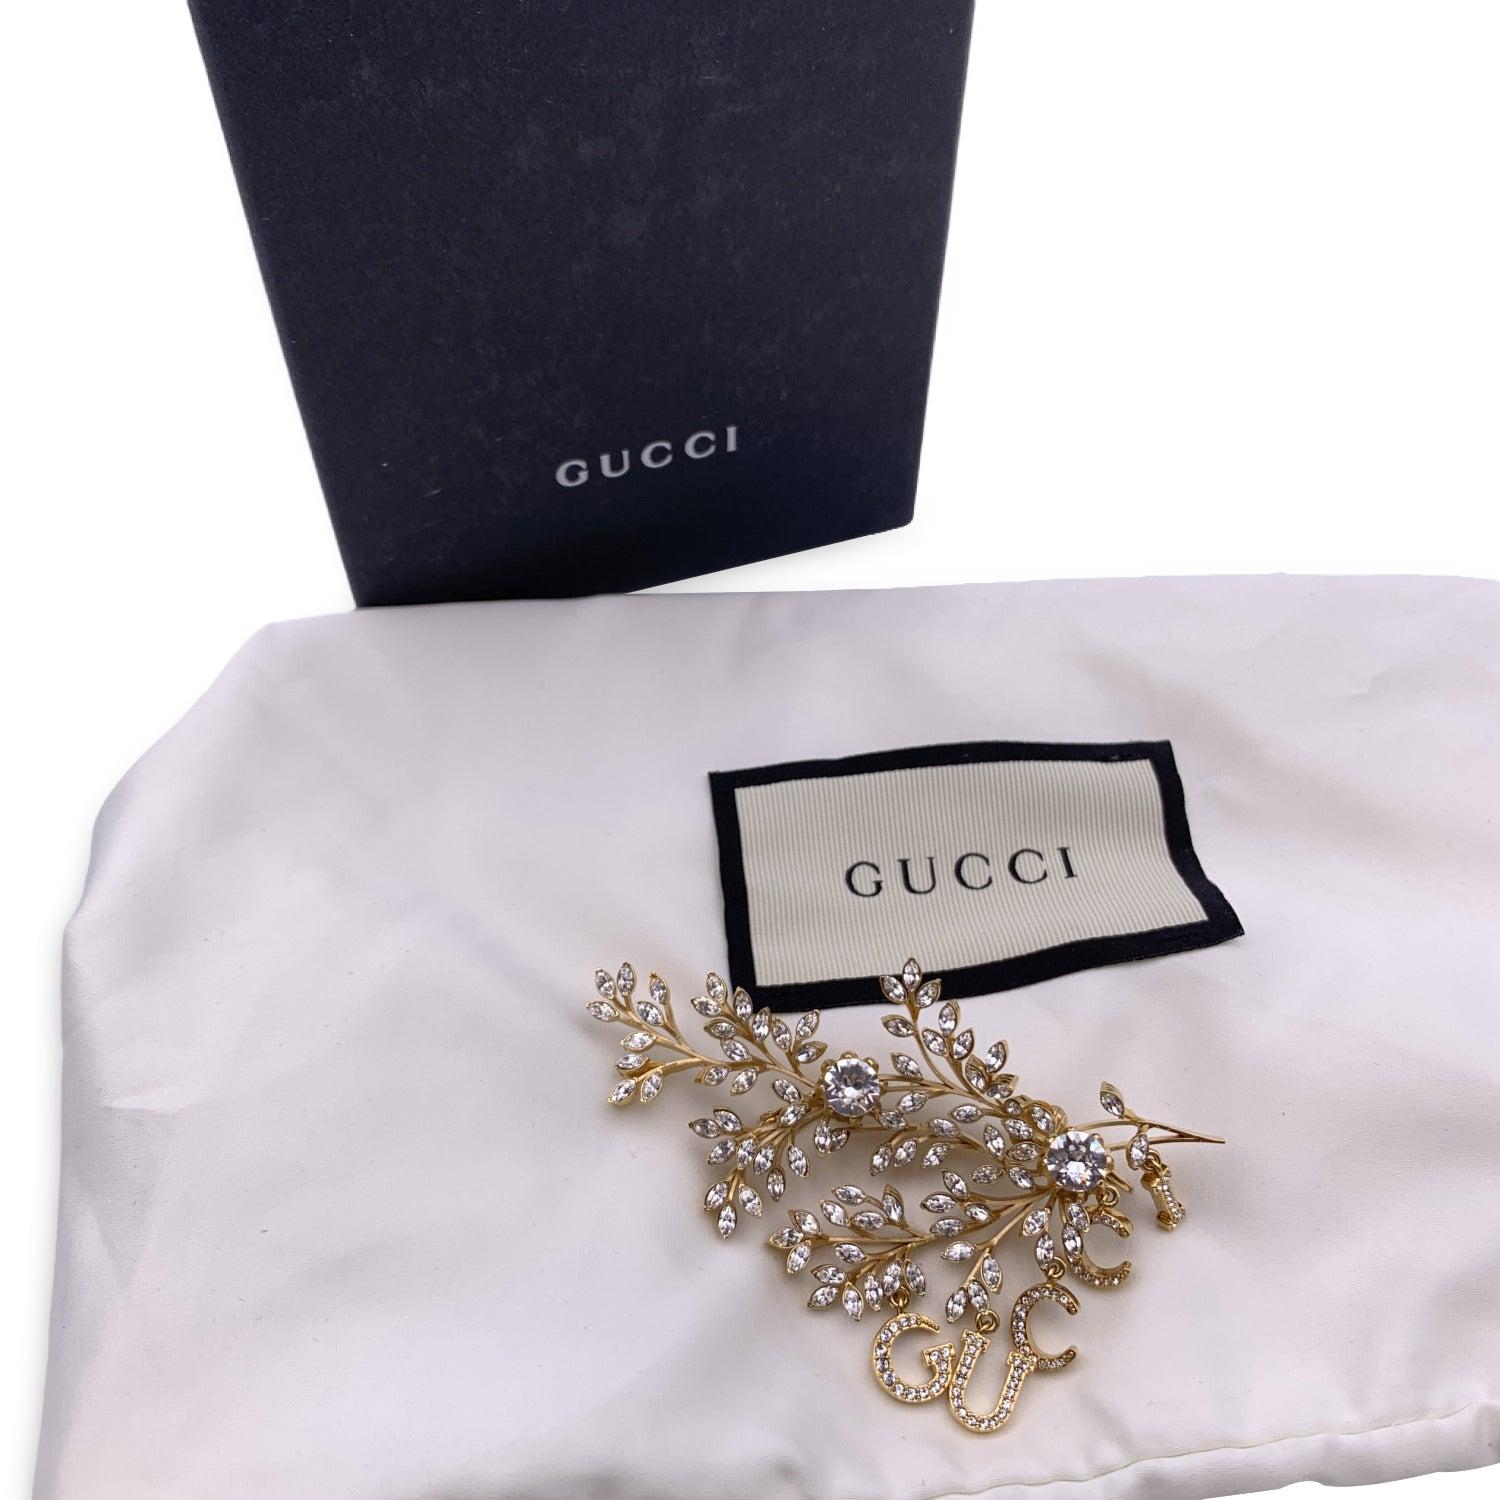 Beautiful GUCCI single gold metal earring with crystals. Dangling Gucci script. Double clip on the back. Total length: 3.5 inches - 8.9 cm. Retail price is 850 euros


Condition

A+ - MINT

Gucci box and dustbag included. Please, look carefully at